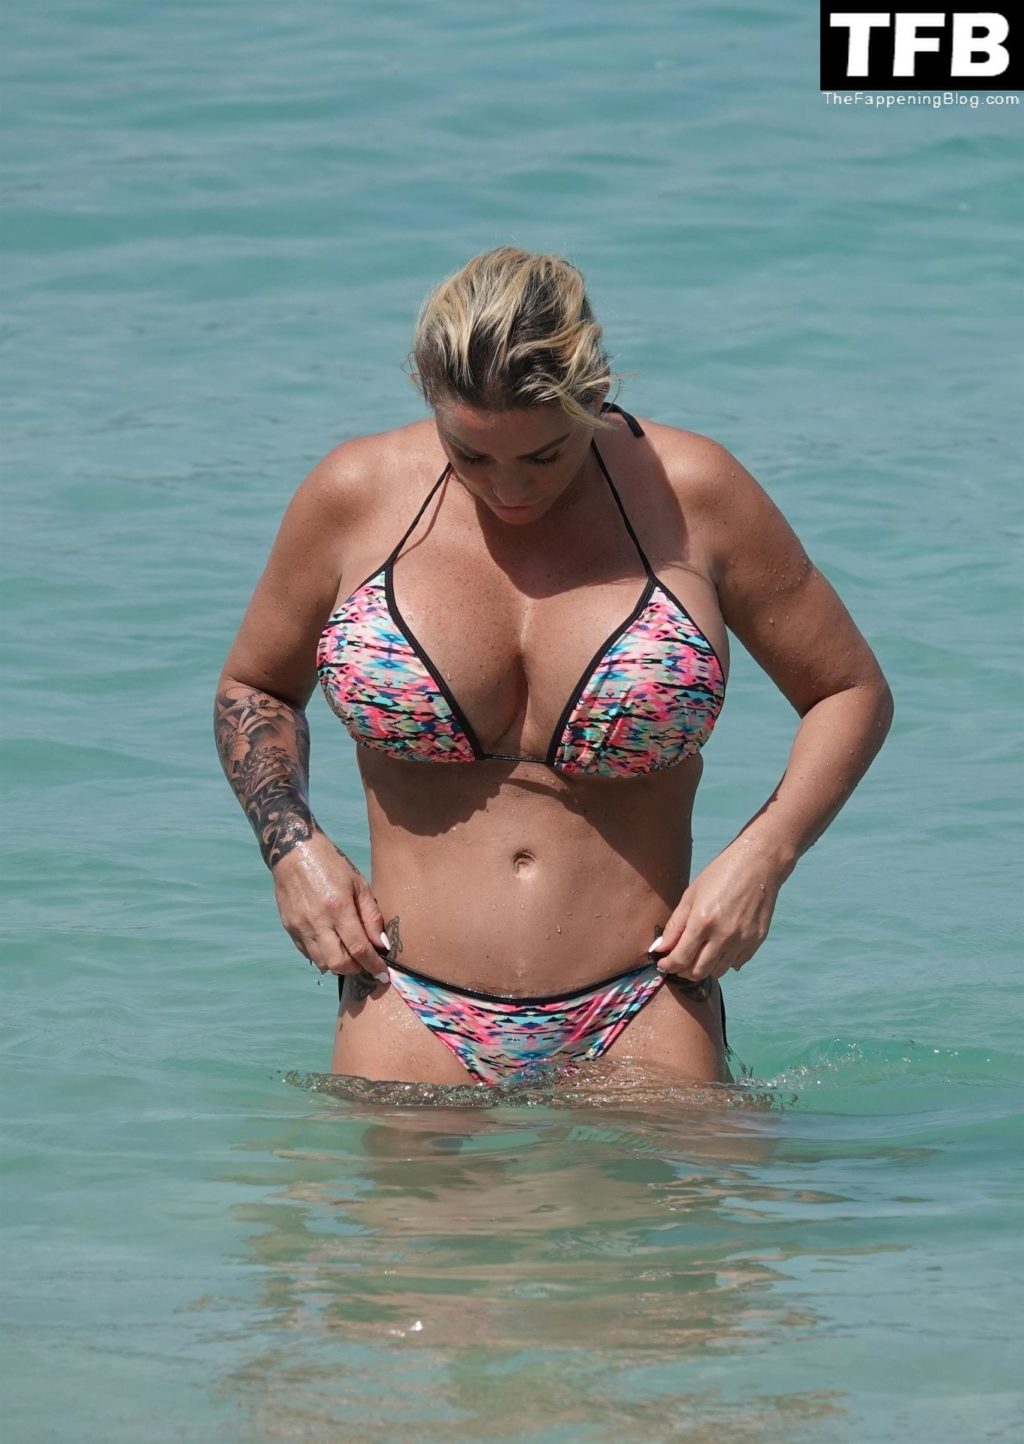 Katie Price Shows Off Her Sexy Boobs on the Beach in Thailand (37 Photos)